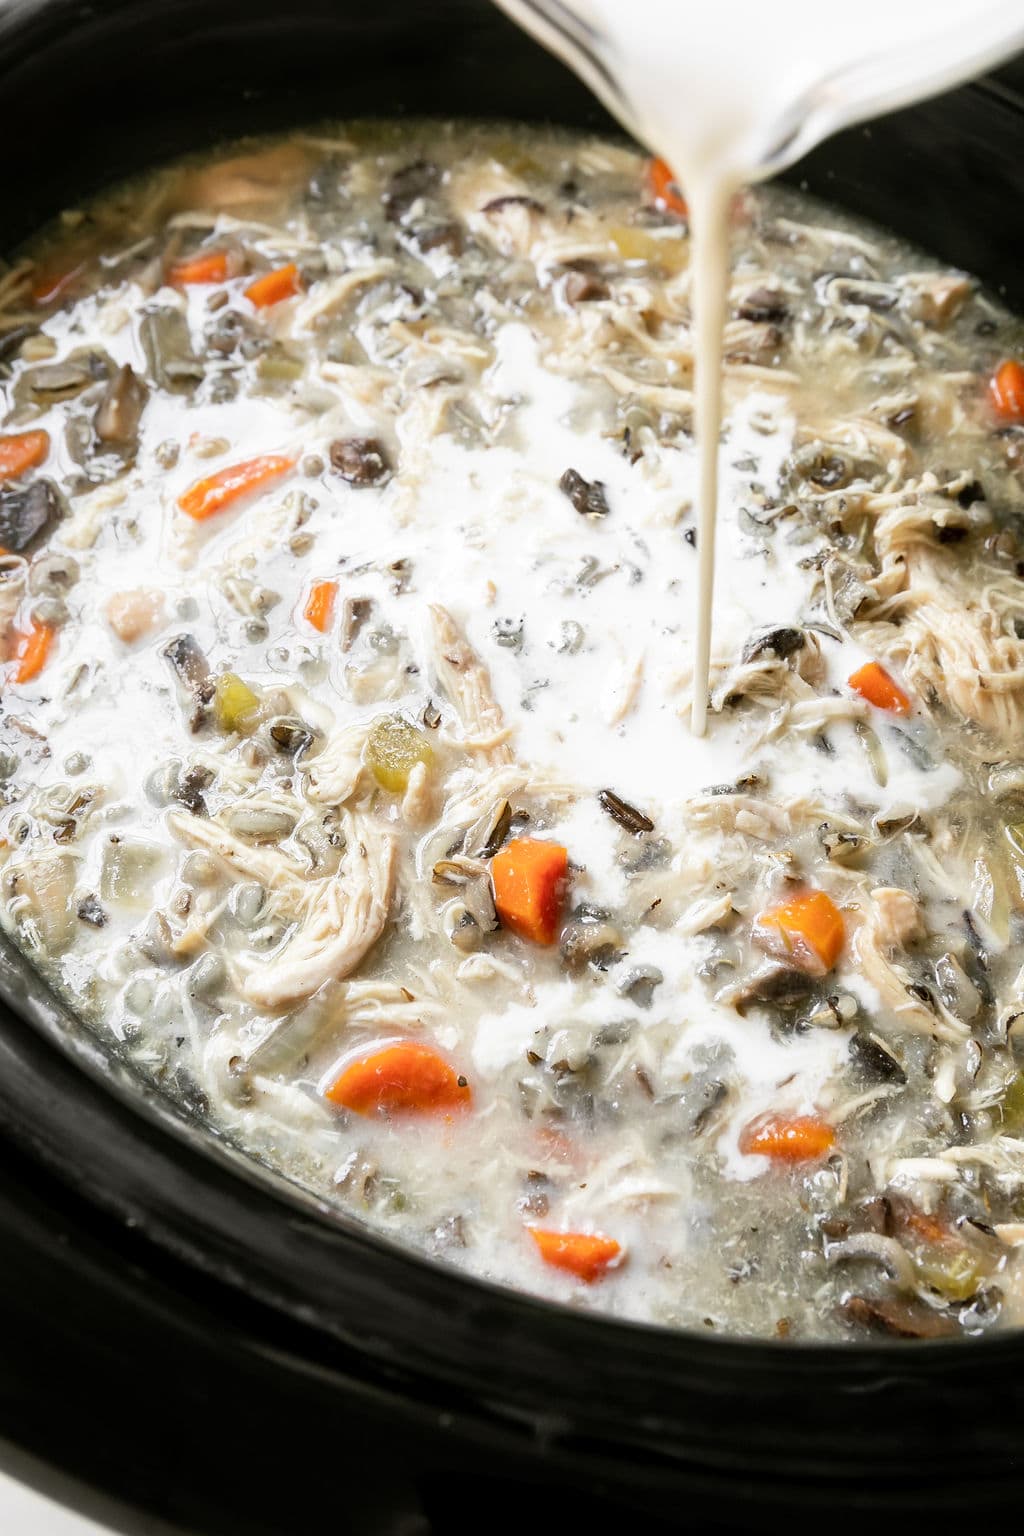 Cream being poured into a black crockpot filled with creamy chicken wild rice soup.